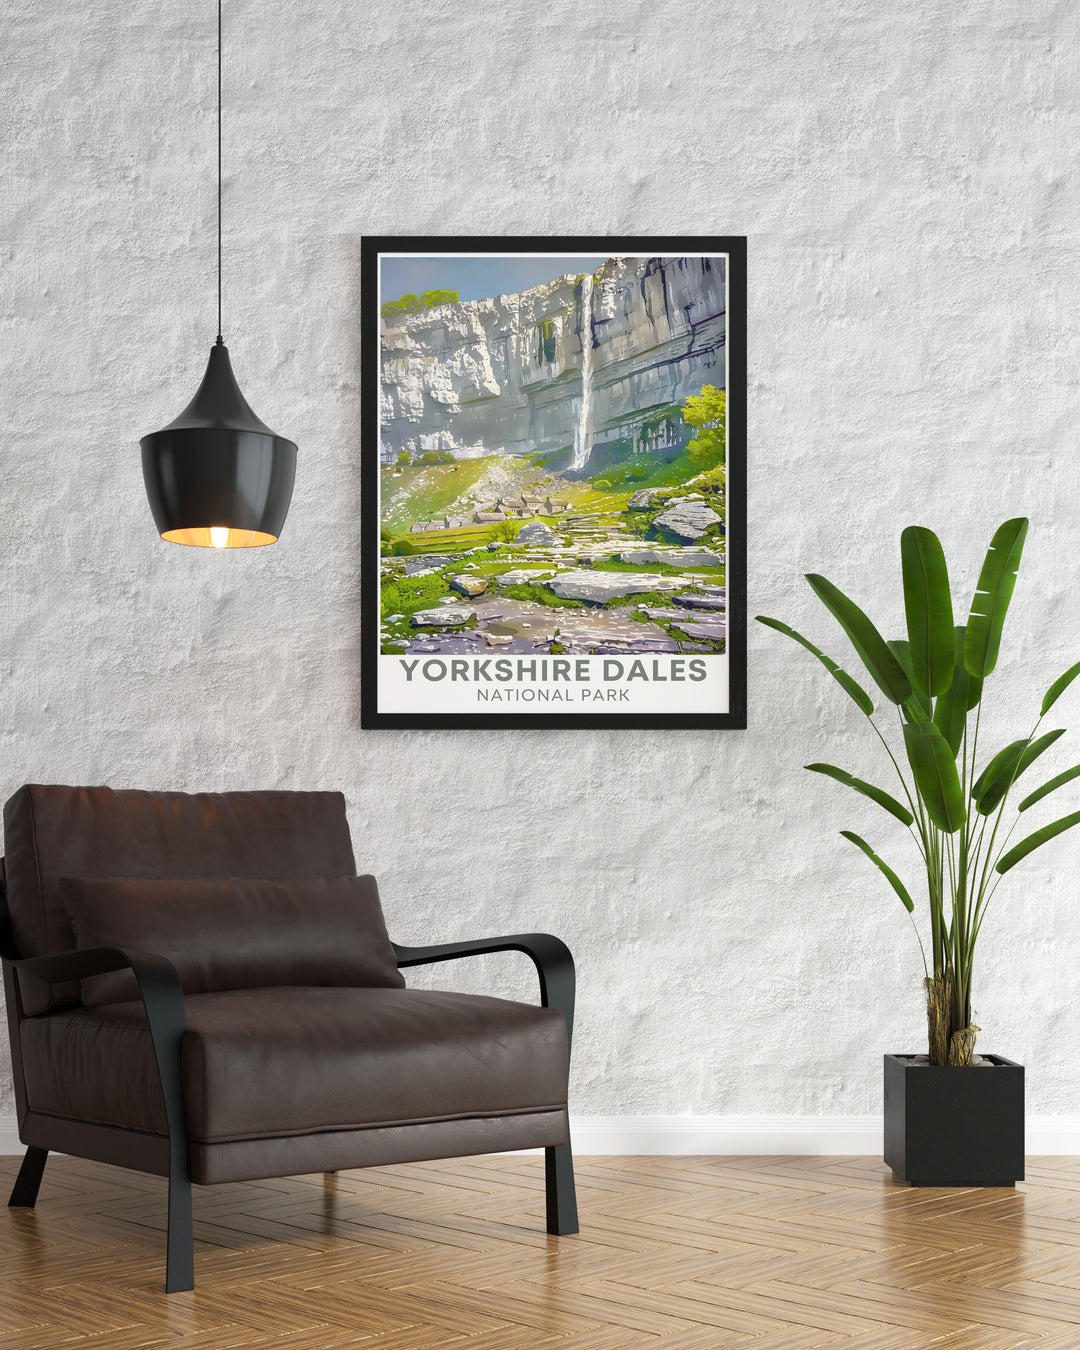 The Malhom Cov posterViaduct showcases the scenic landscapes of the Yorkshire Dales a perfect piece of wall art for those who love the outdoors and the beauty of the UK countryside.